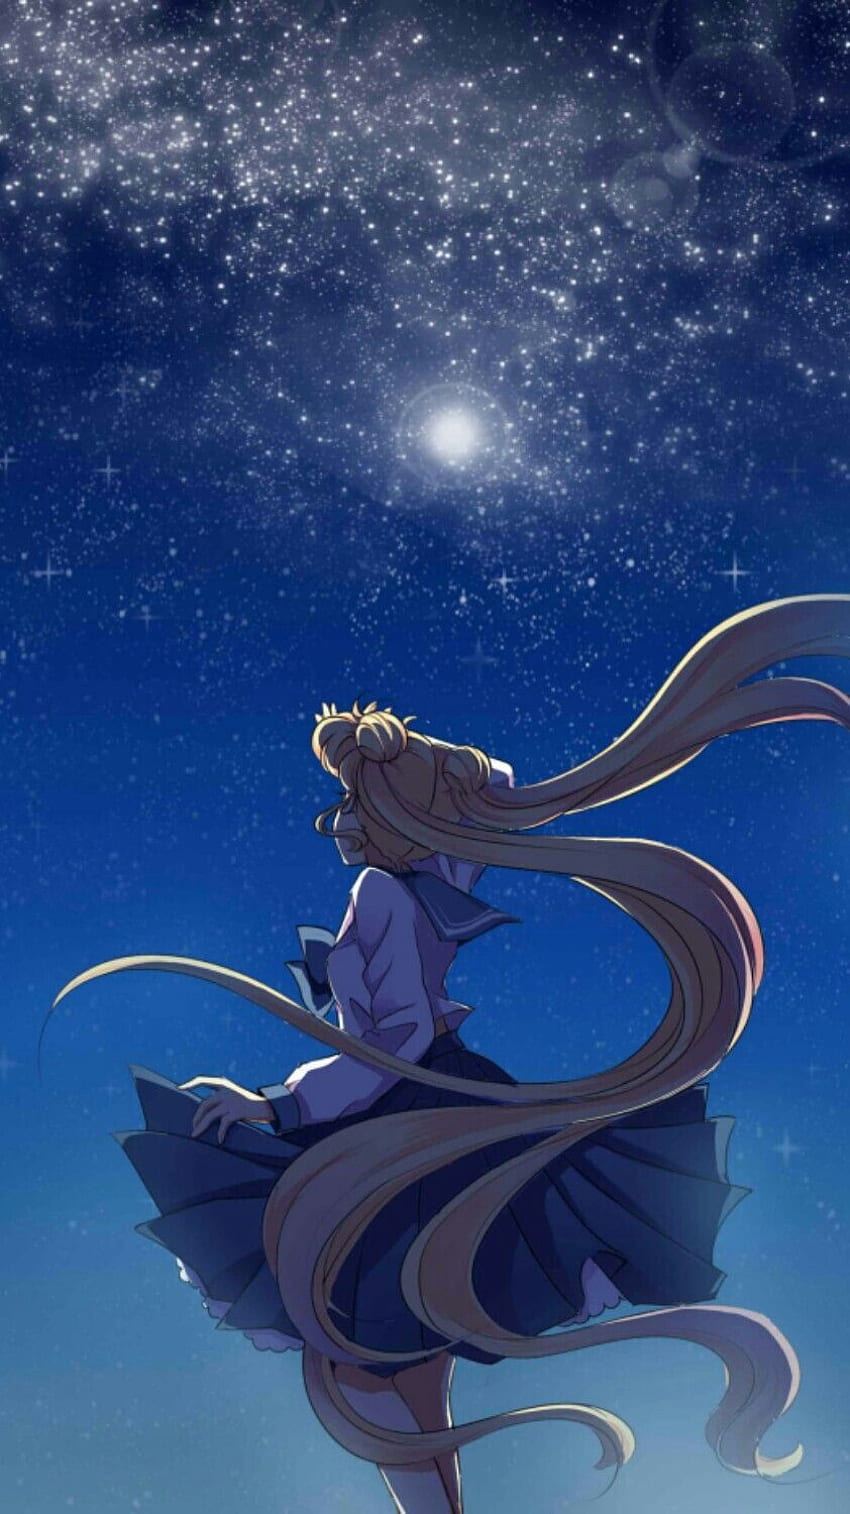 Sailor Moon Android Wallpaper for mobile phone tablet desktop computer  and other devices HD an  Arte sailor moon Sailor moon Fondo de  pantalla de sailor moon